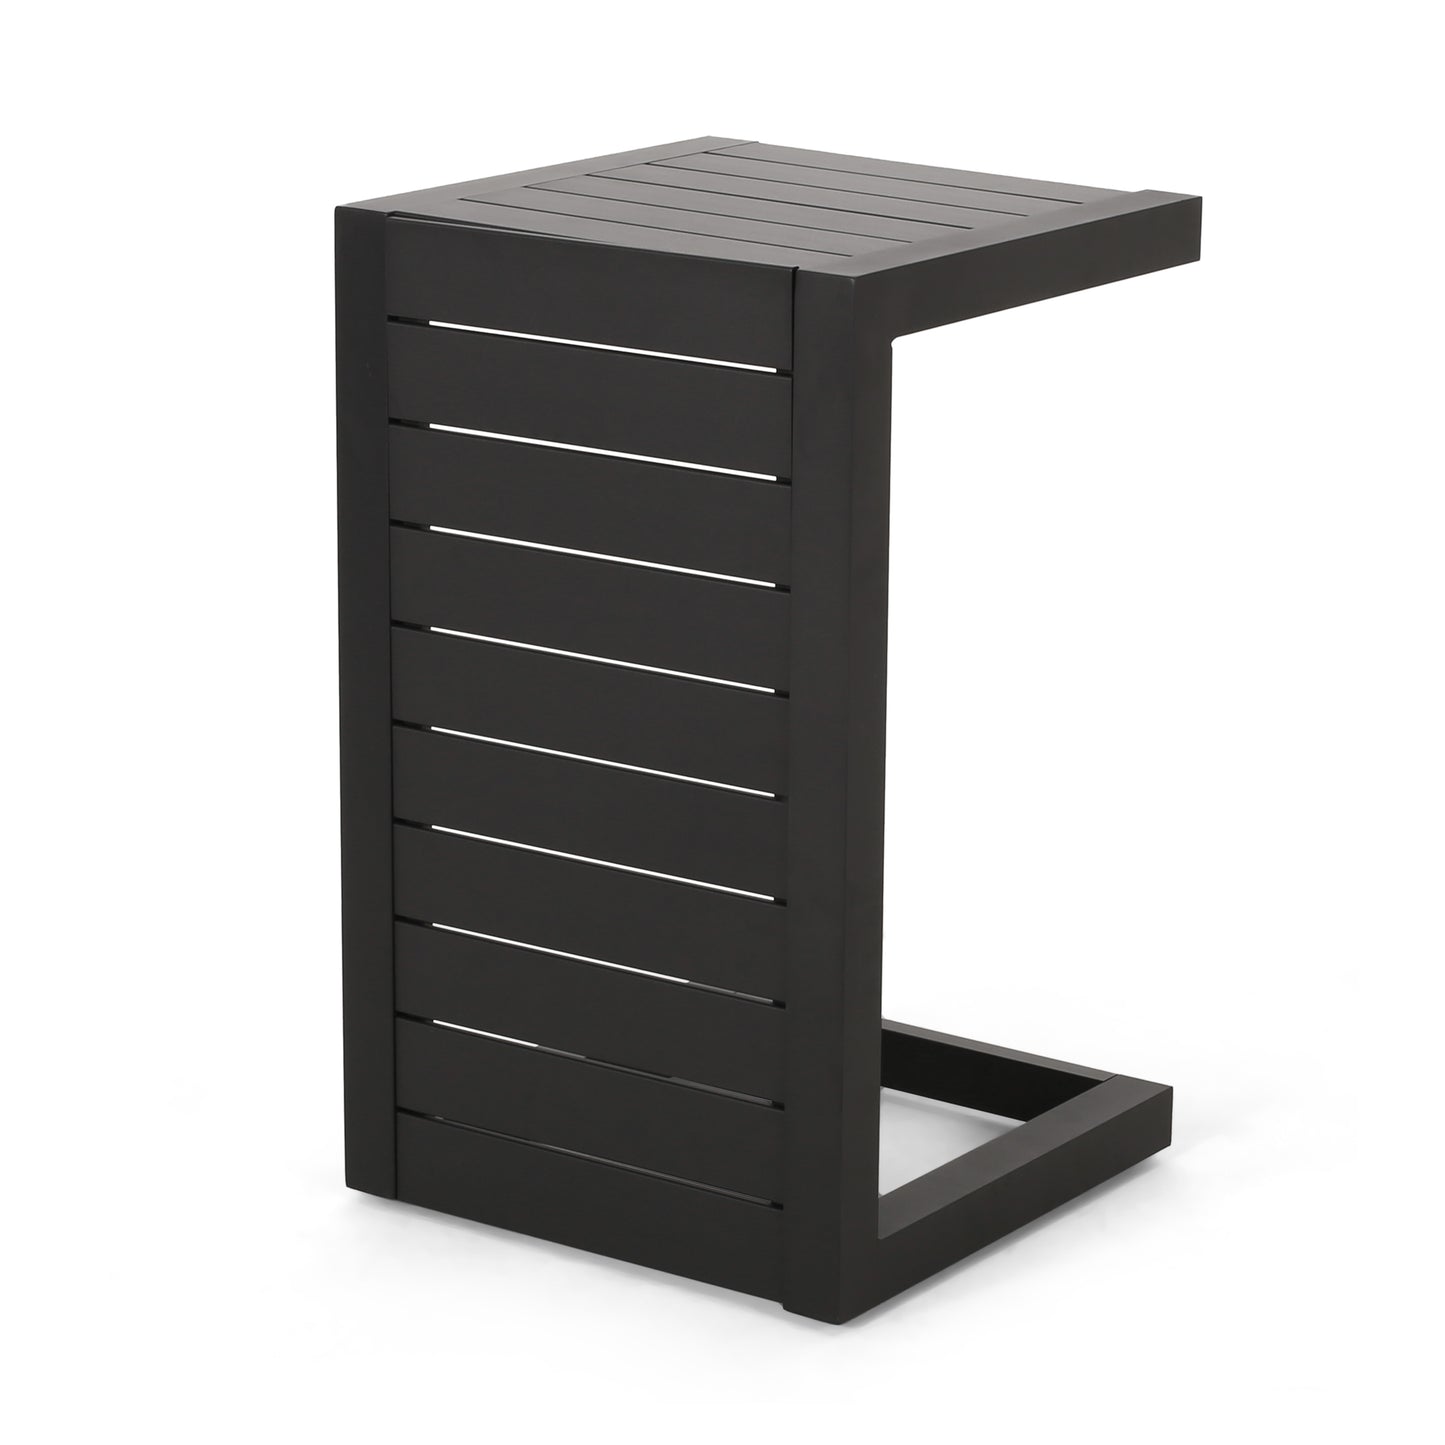 Cherie Outdoor Modern Aluminum C-Shaped End Table